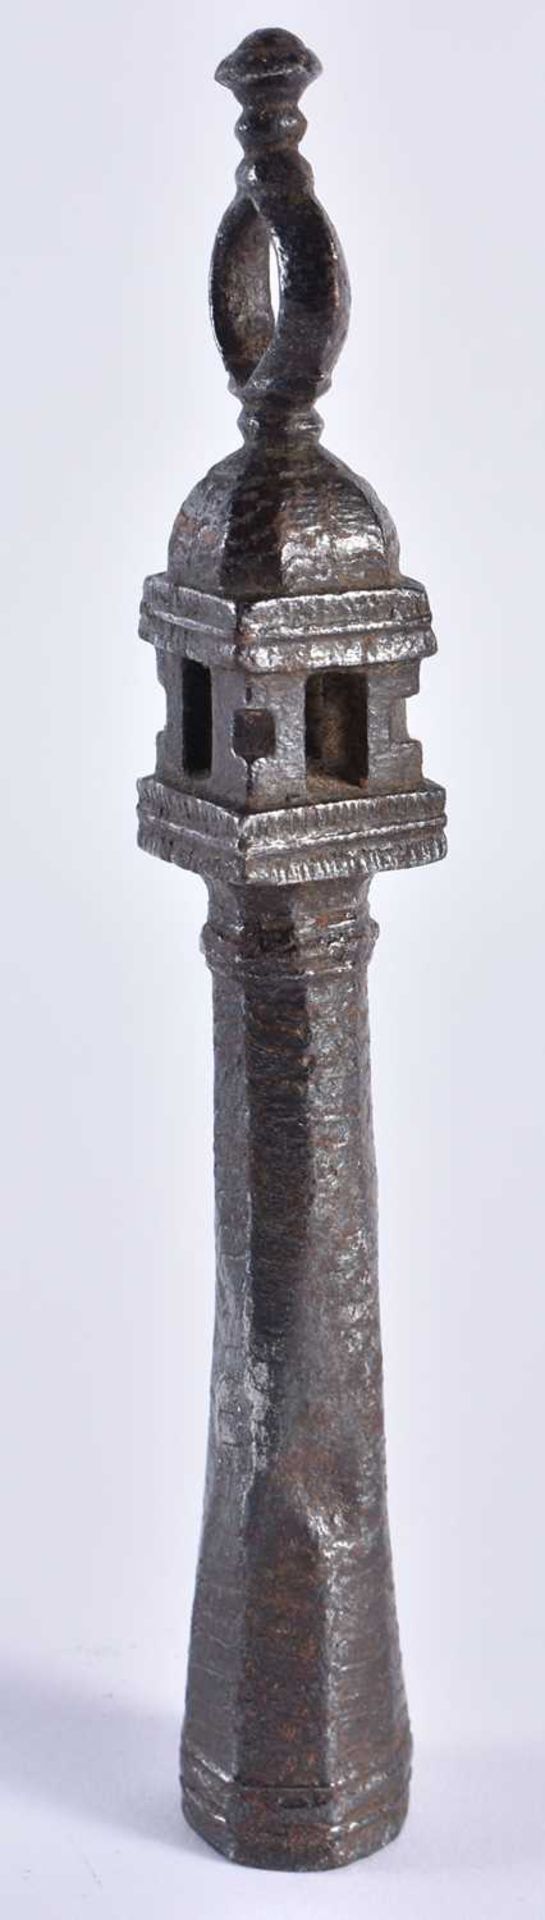 AN 18TH CENTURY MIDDLE EASTERN ISLAMIC IRON TURKISH SCULPTURE formed as a column. 18 cm high. - Image 4 of 5